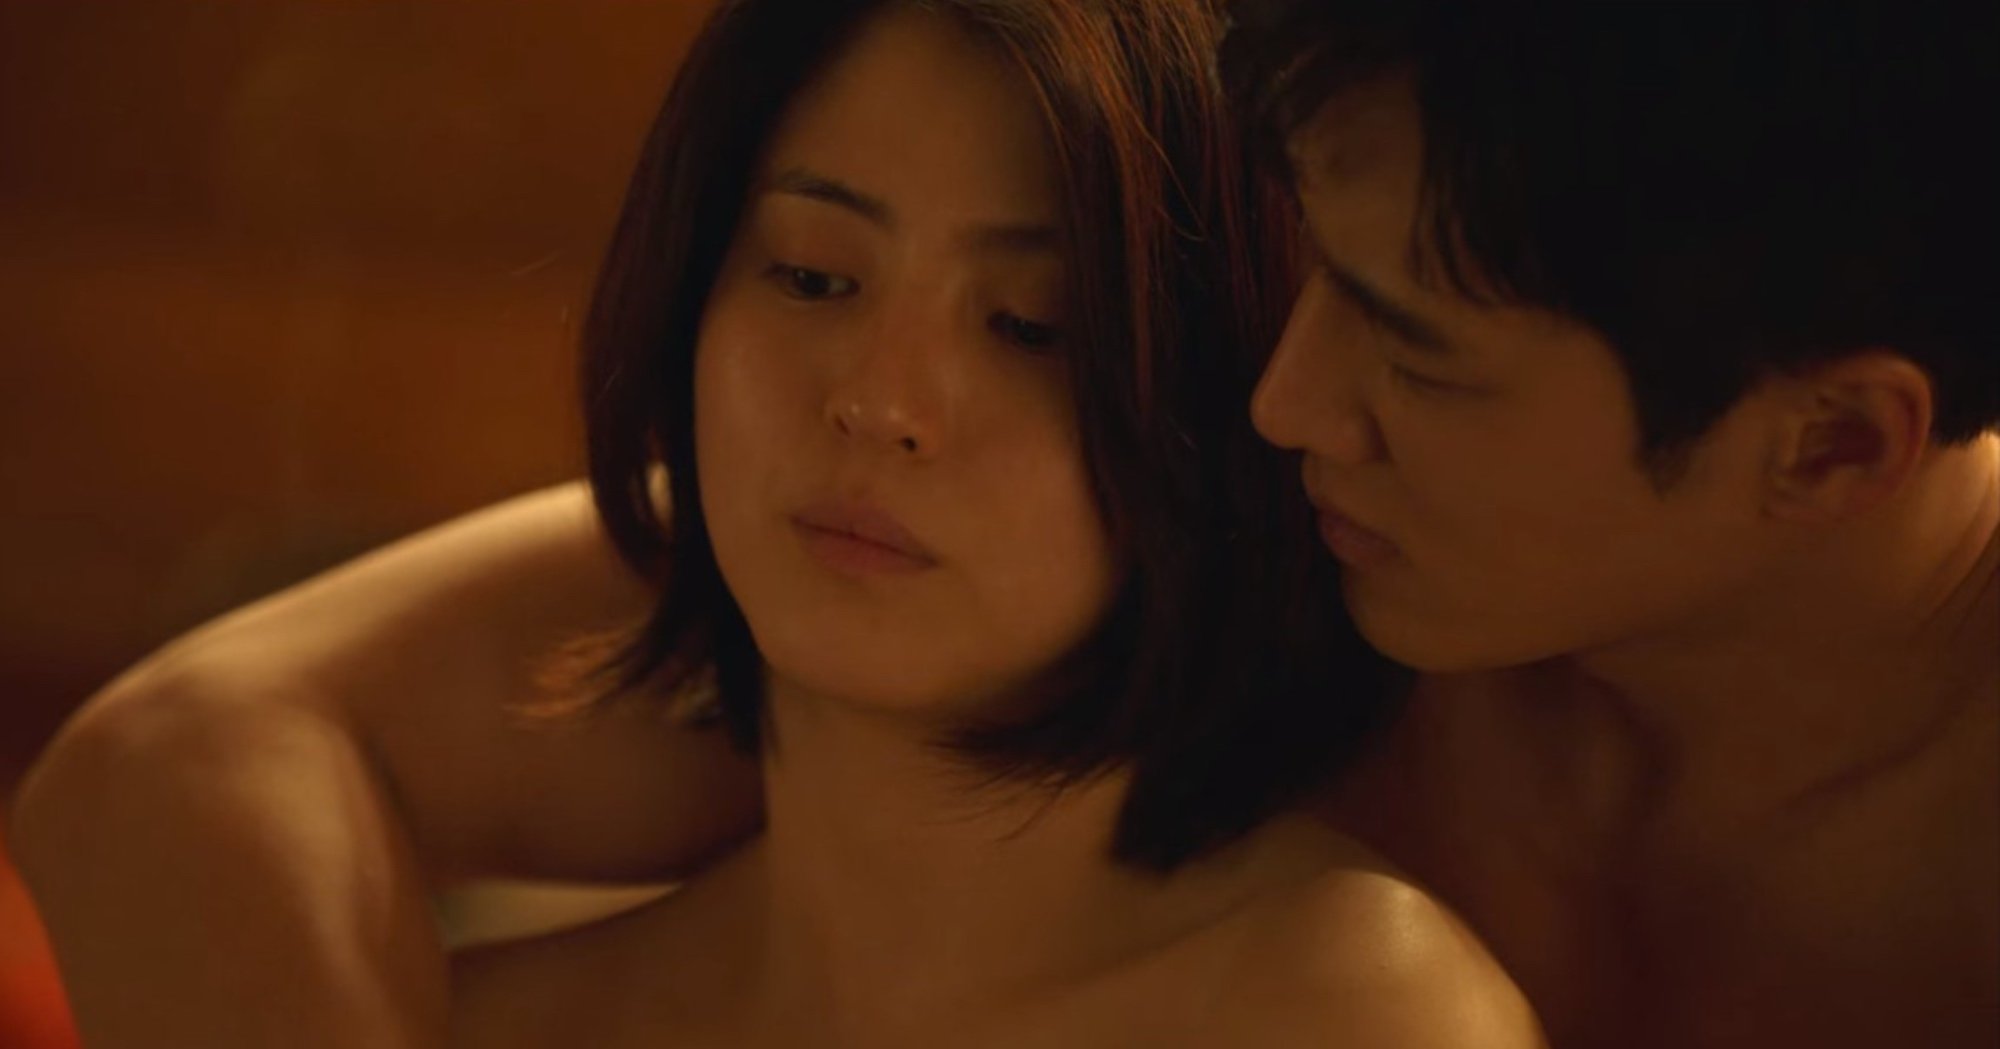 4 of the Most Explicit Sex Scenes From K-Dramas pic